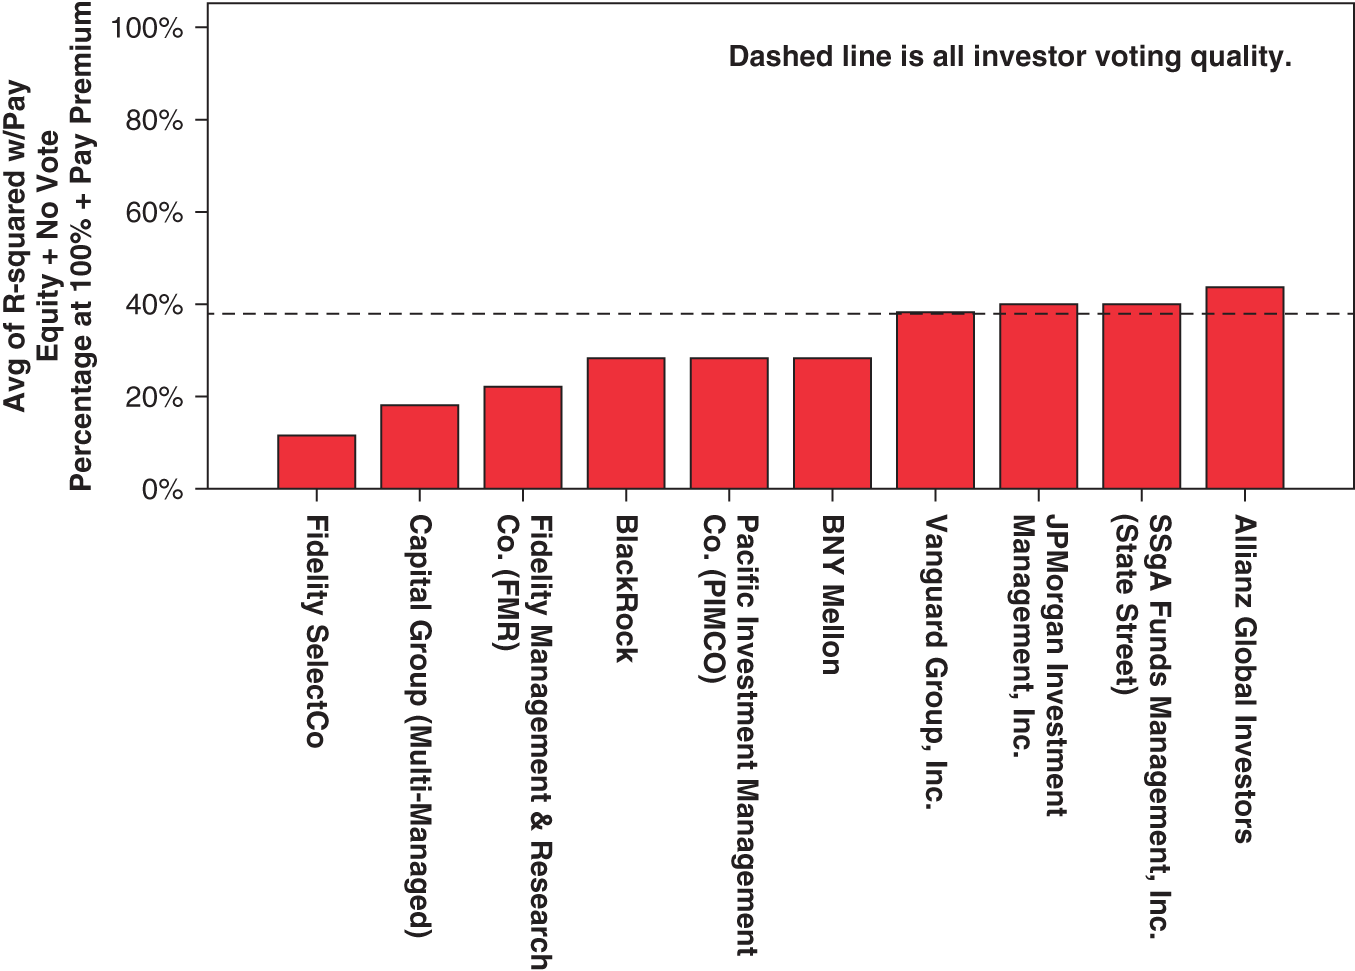 Bar chart depicts the voting quality at the ten largest funds.